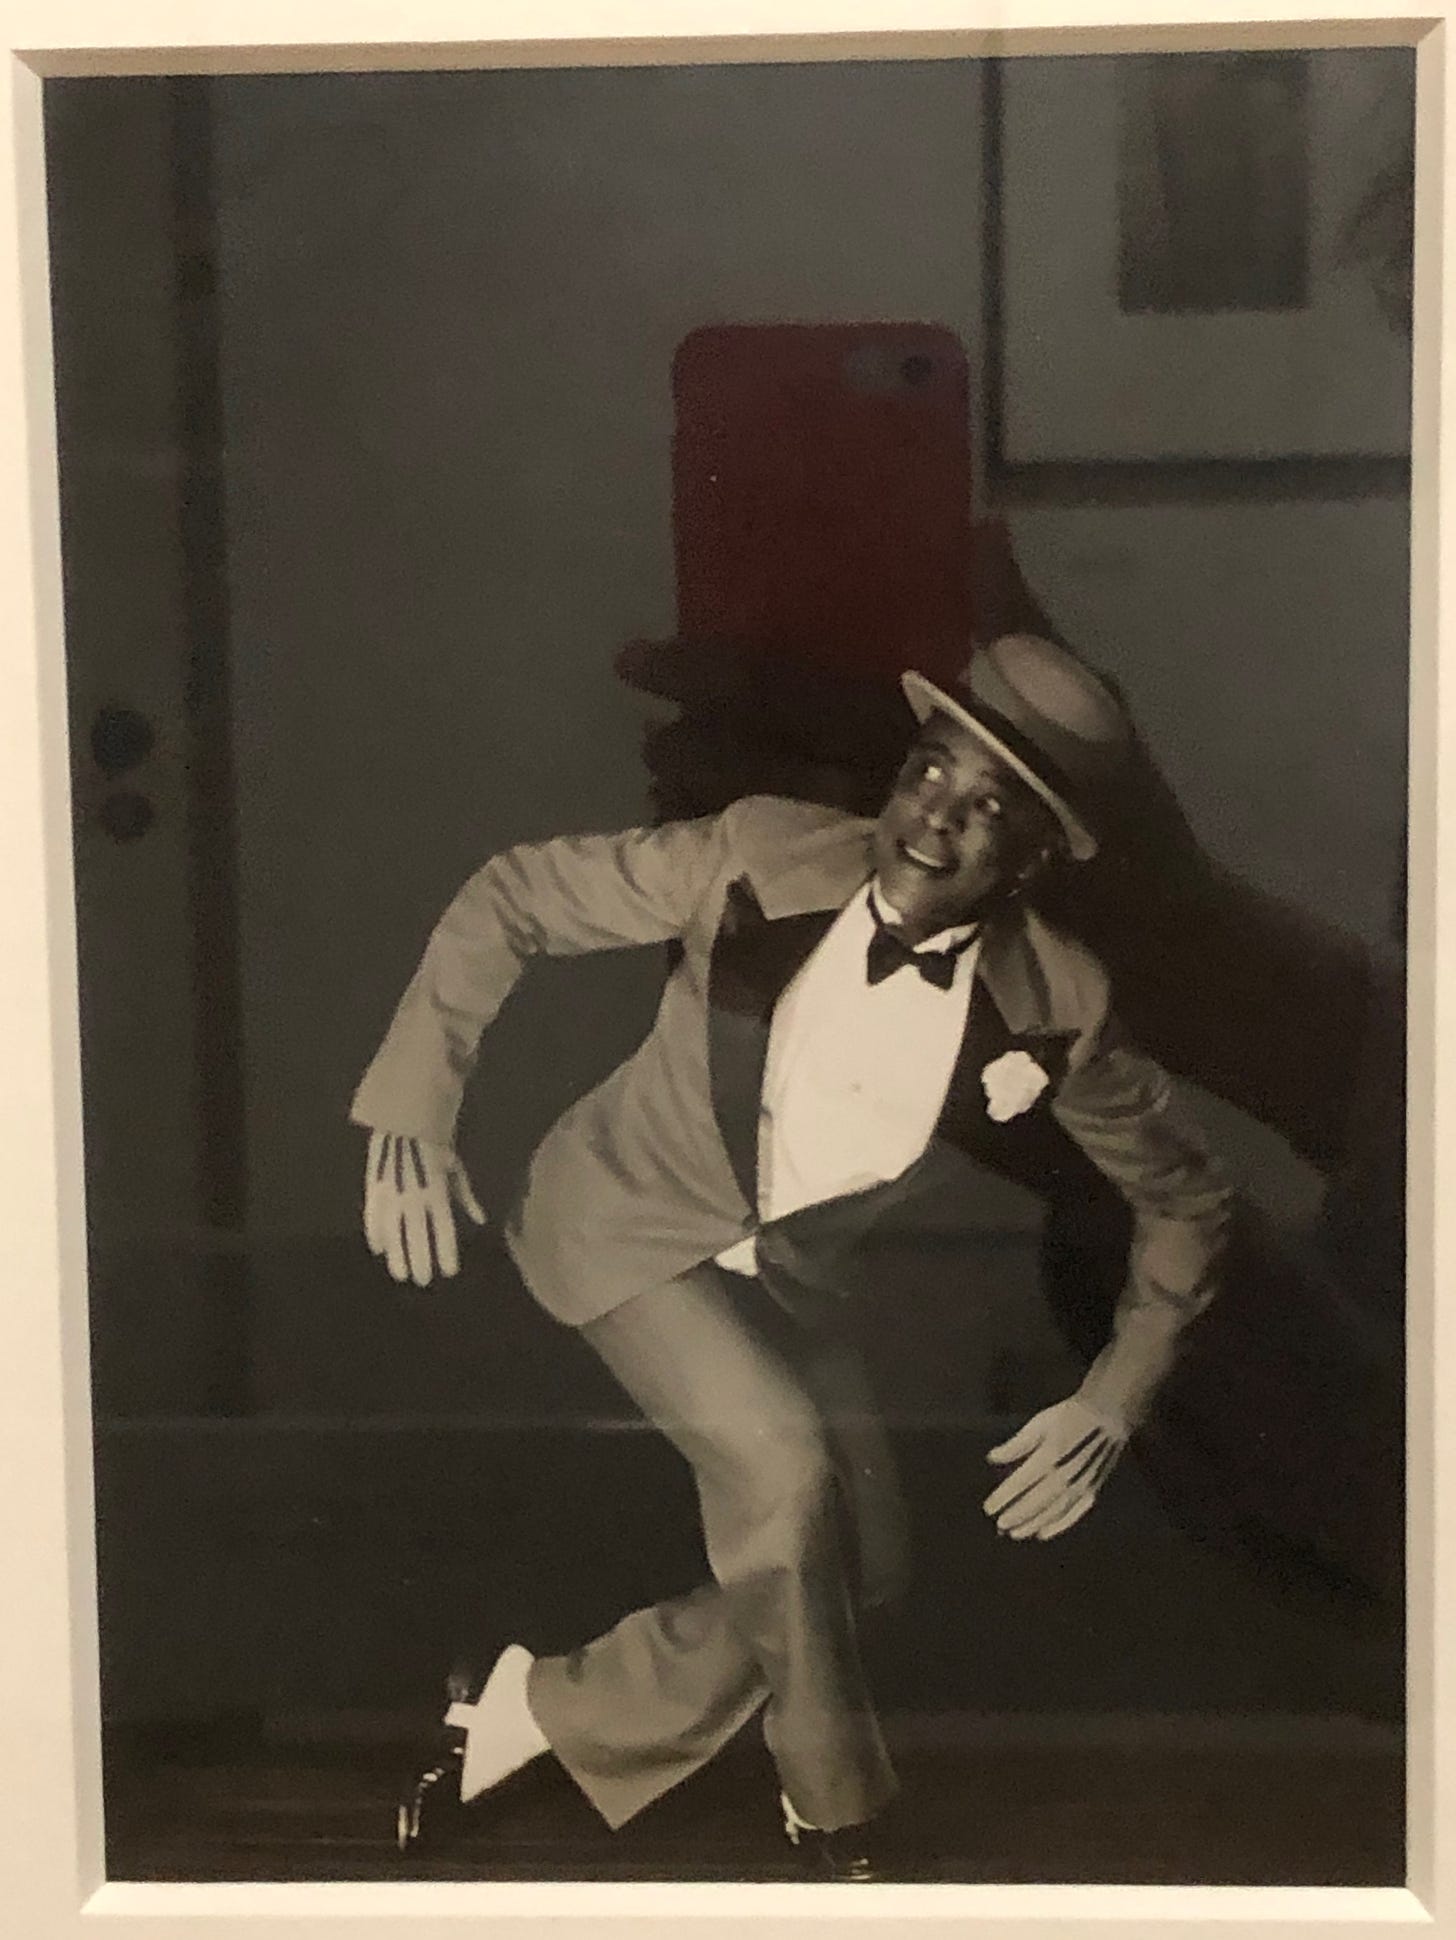 A man in a suit, bowtie and bowler-ish hat in tap-dance action: left knee fully bent, right leg stretched out straight in front, left arm outstretched and pointing downwards, and right hand in the air, raising his hat.